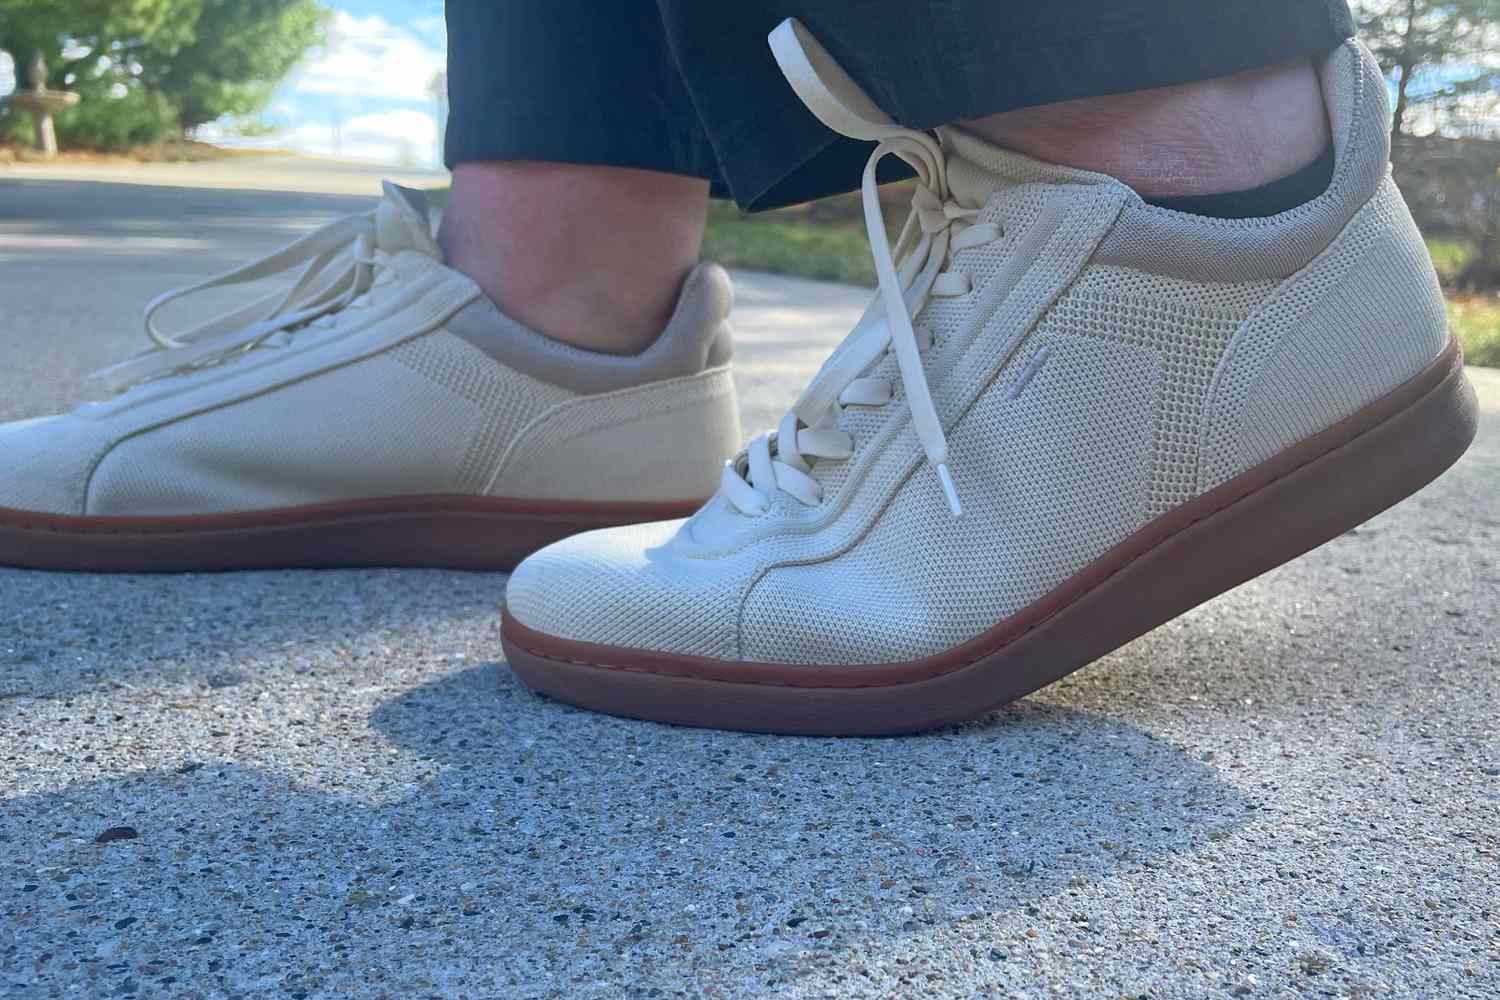 A person walks outside on concrete while wearing the Vivaia V Prime Unisex Casual Sneaker